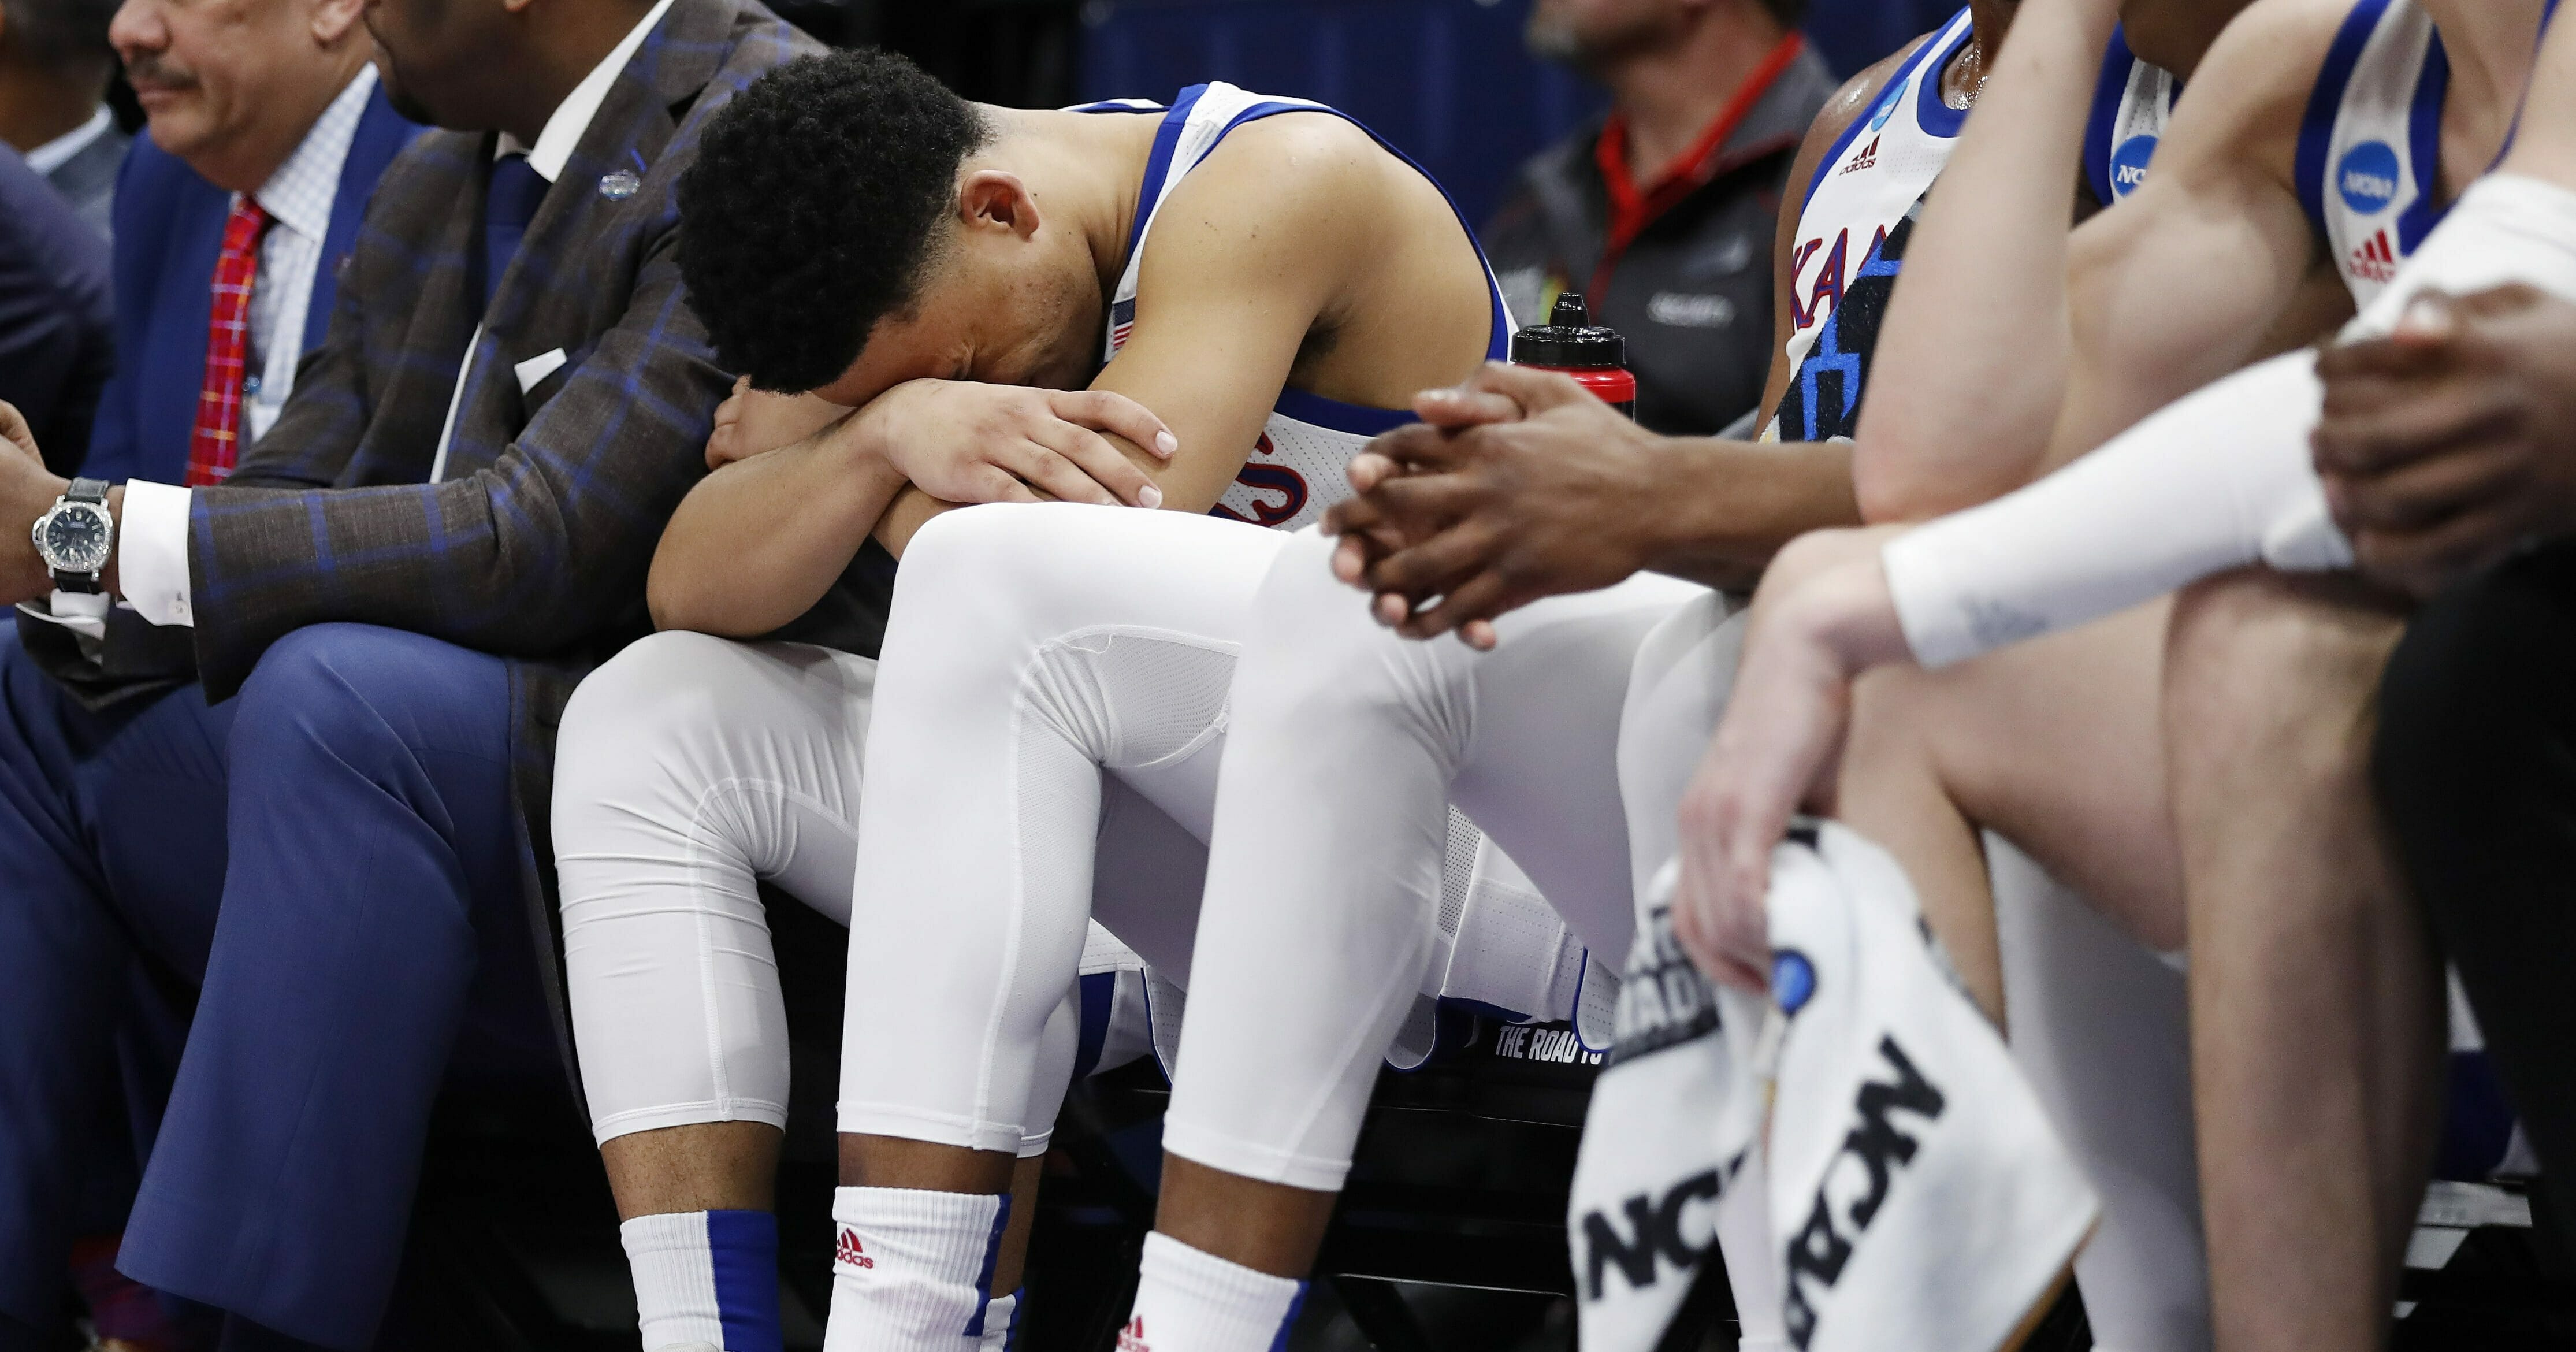 Kansas guard Devon Dotson sits on the bench in the closing minutes of the team's loss to Auburn in a second-round game in the NCAA men's college basketball tournament Saturday, Mar. 23, 2019, in Salt Lake City.